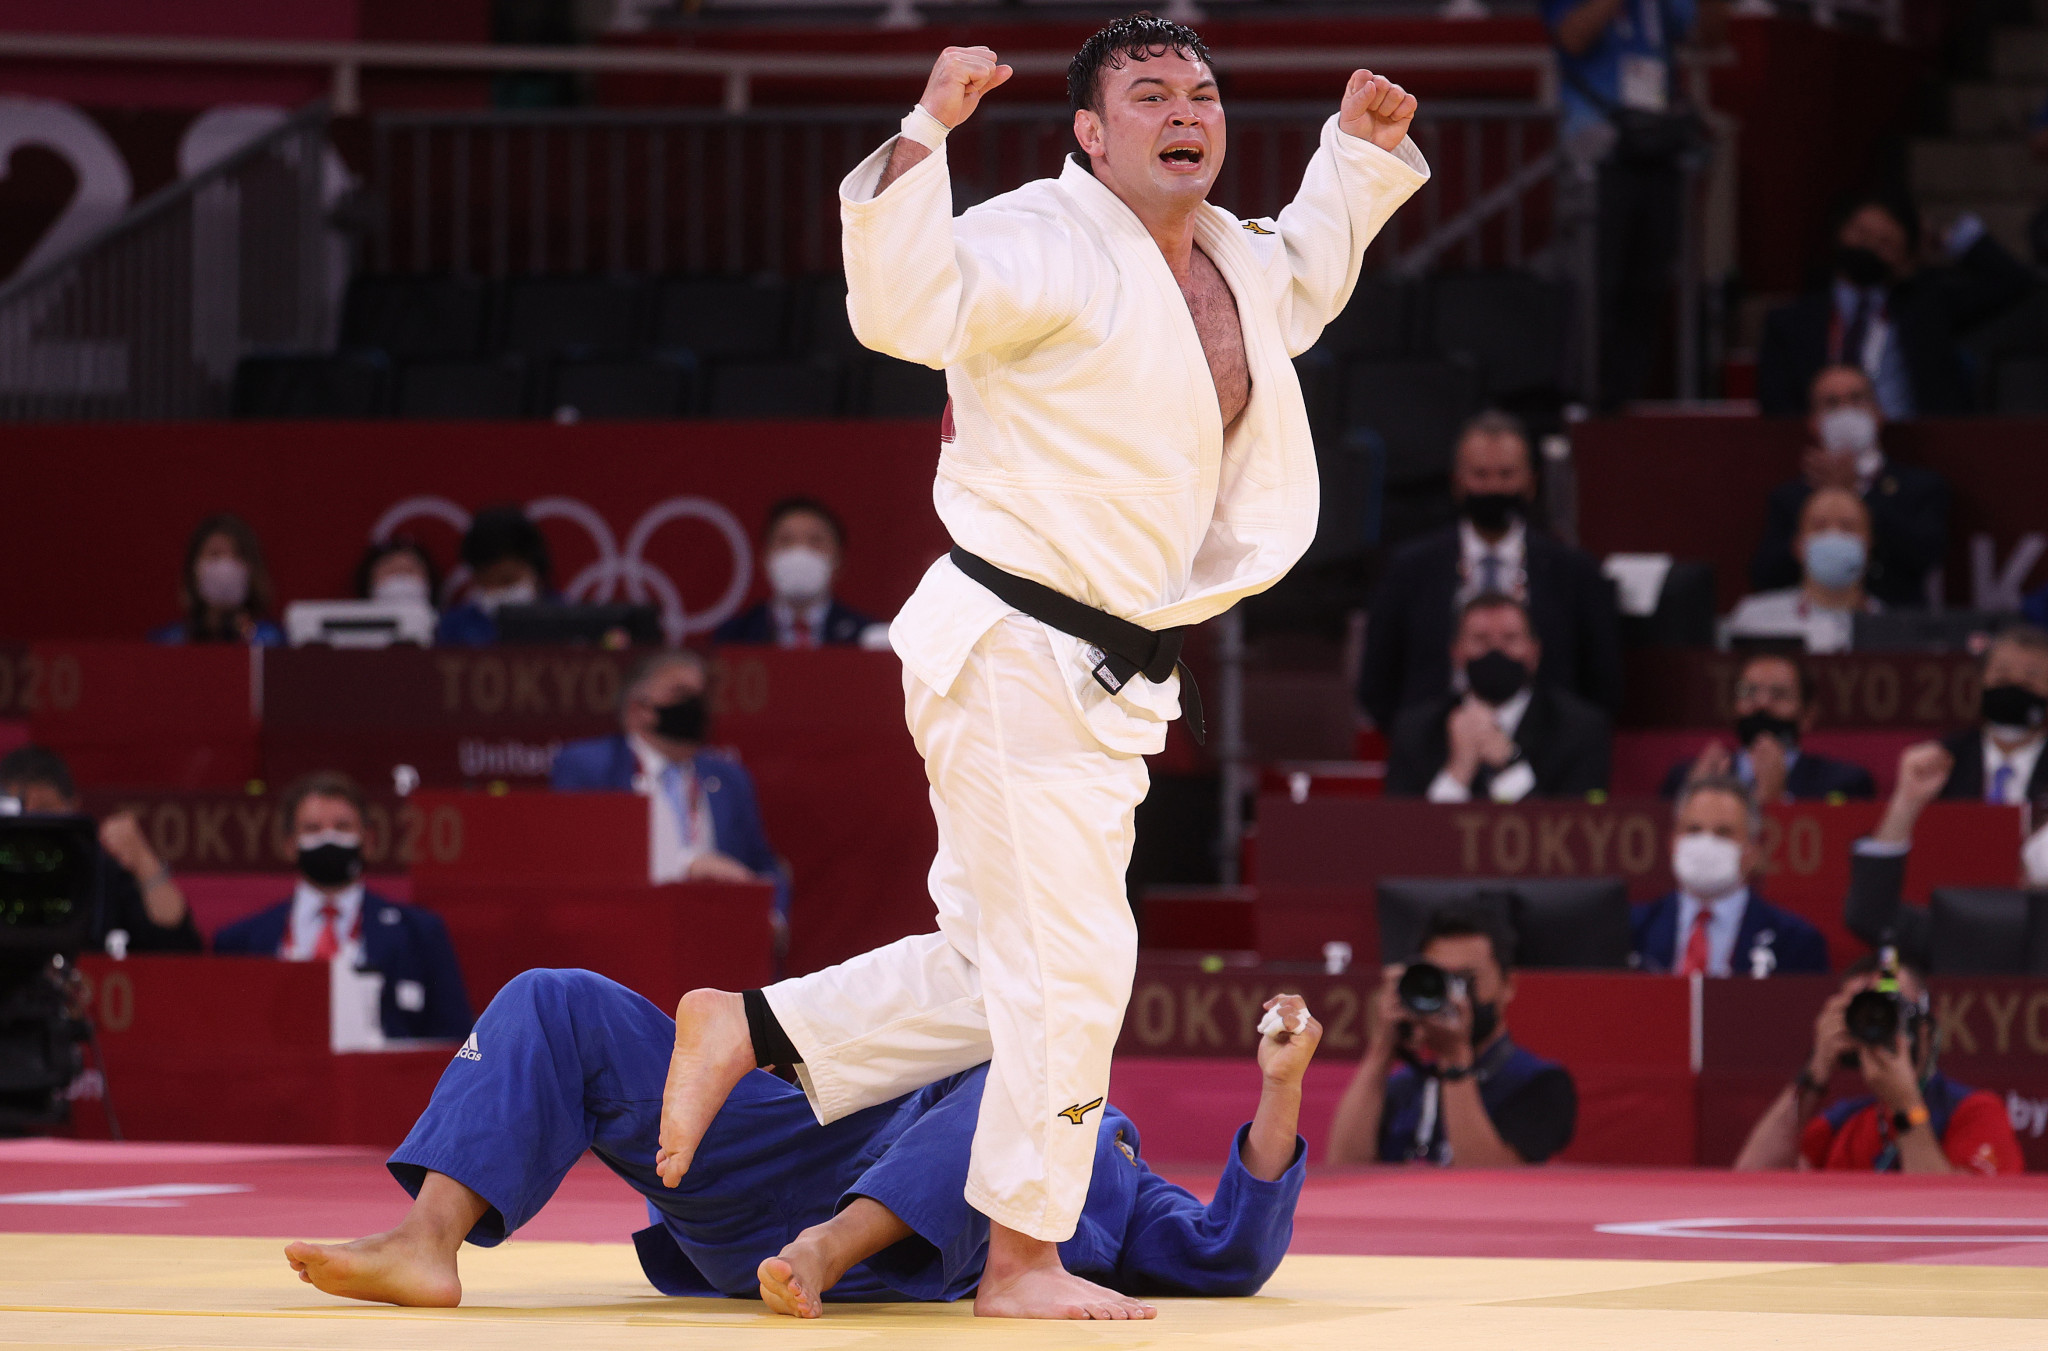 Wolf wins epic as Hamada shines on another golden day for Japan in judo